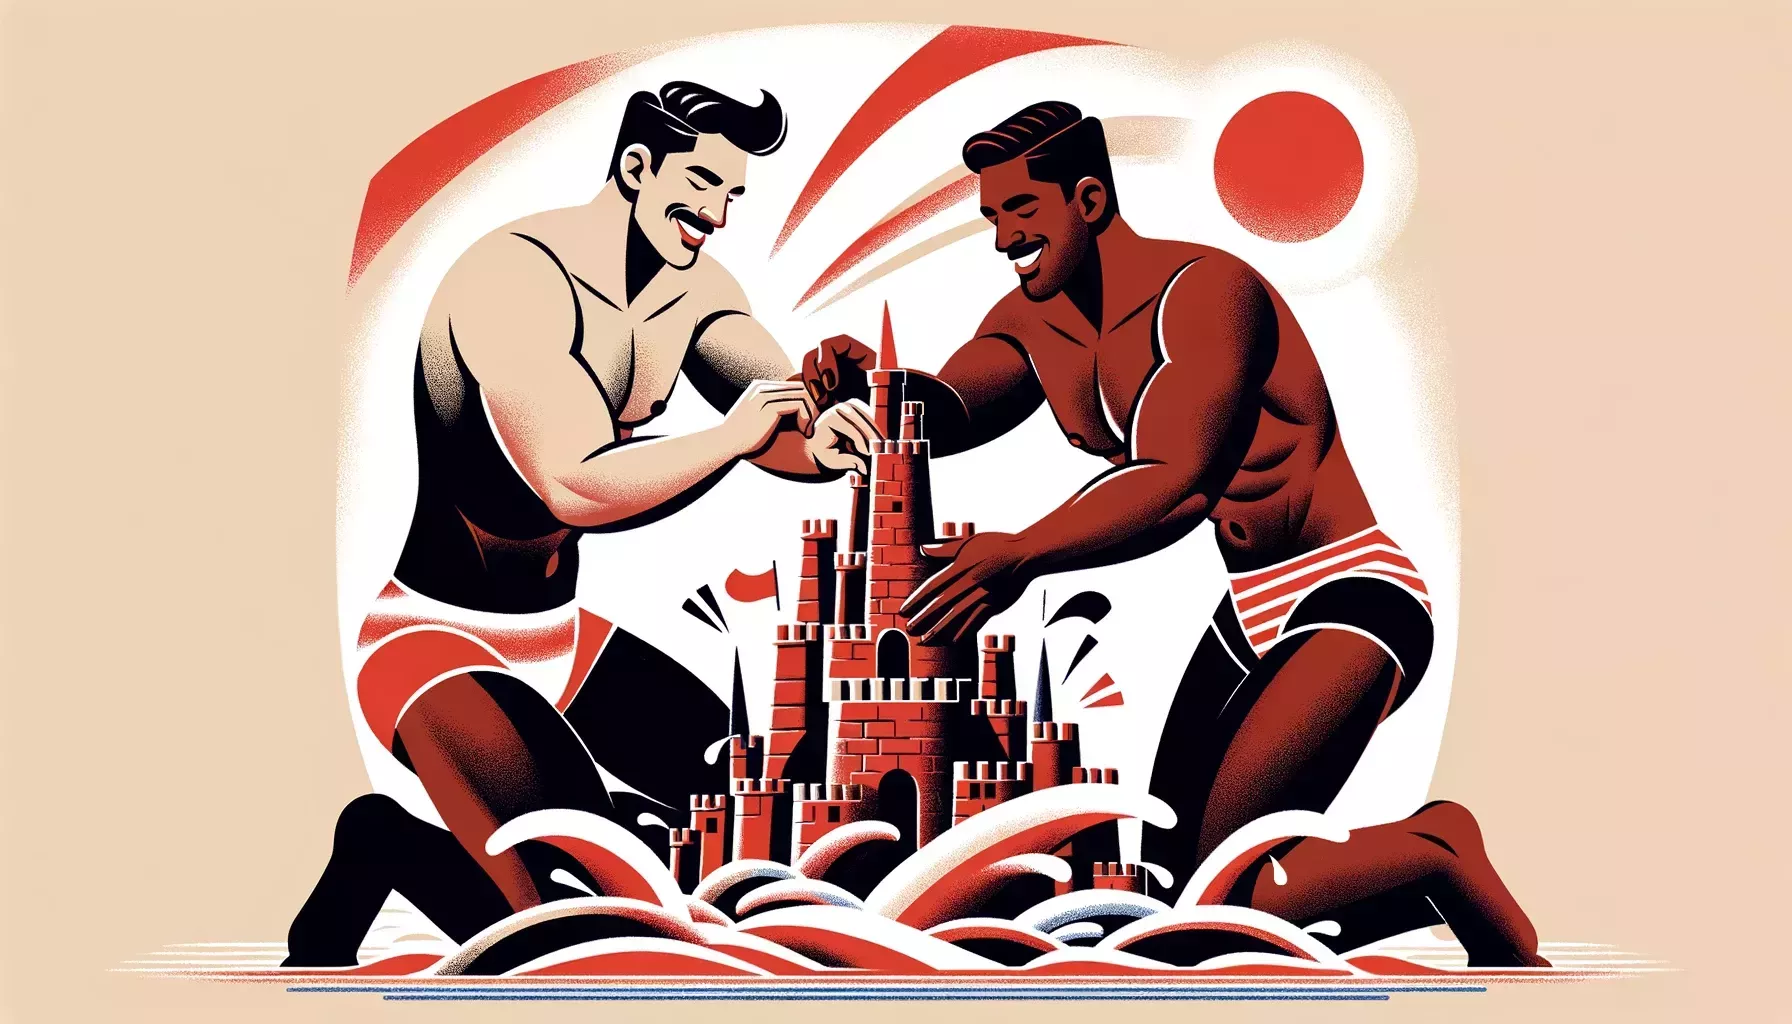 Two men on a beach date dressed in speedos are joyfully constructing an elaborate sandcastle together on the beach. The scene is stylized with a limited color palette of red, black, and white, capturing the essence of a cheerful beach day. 